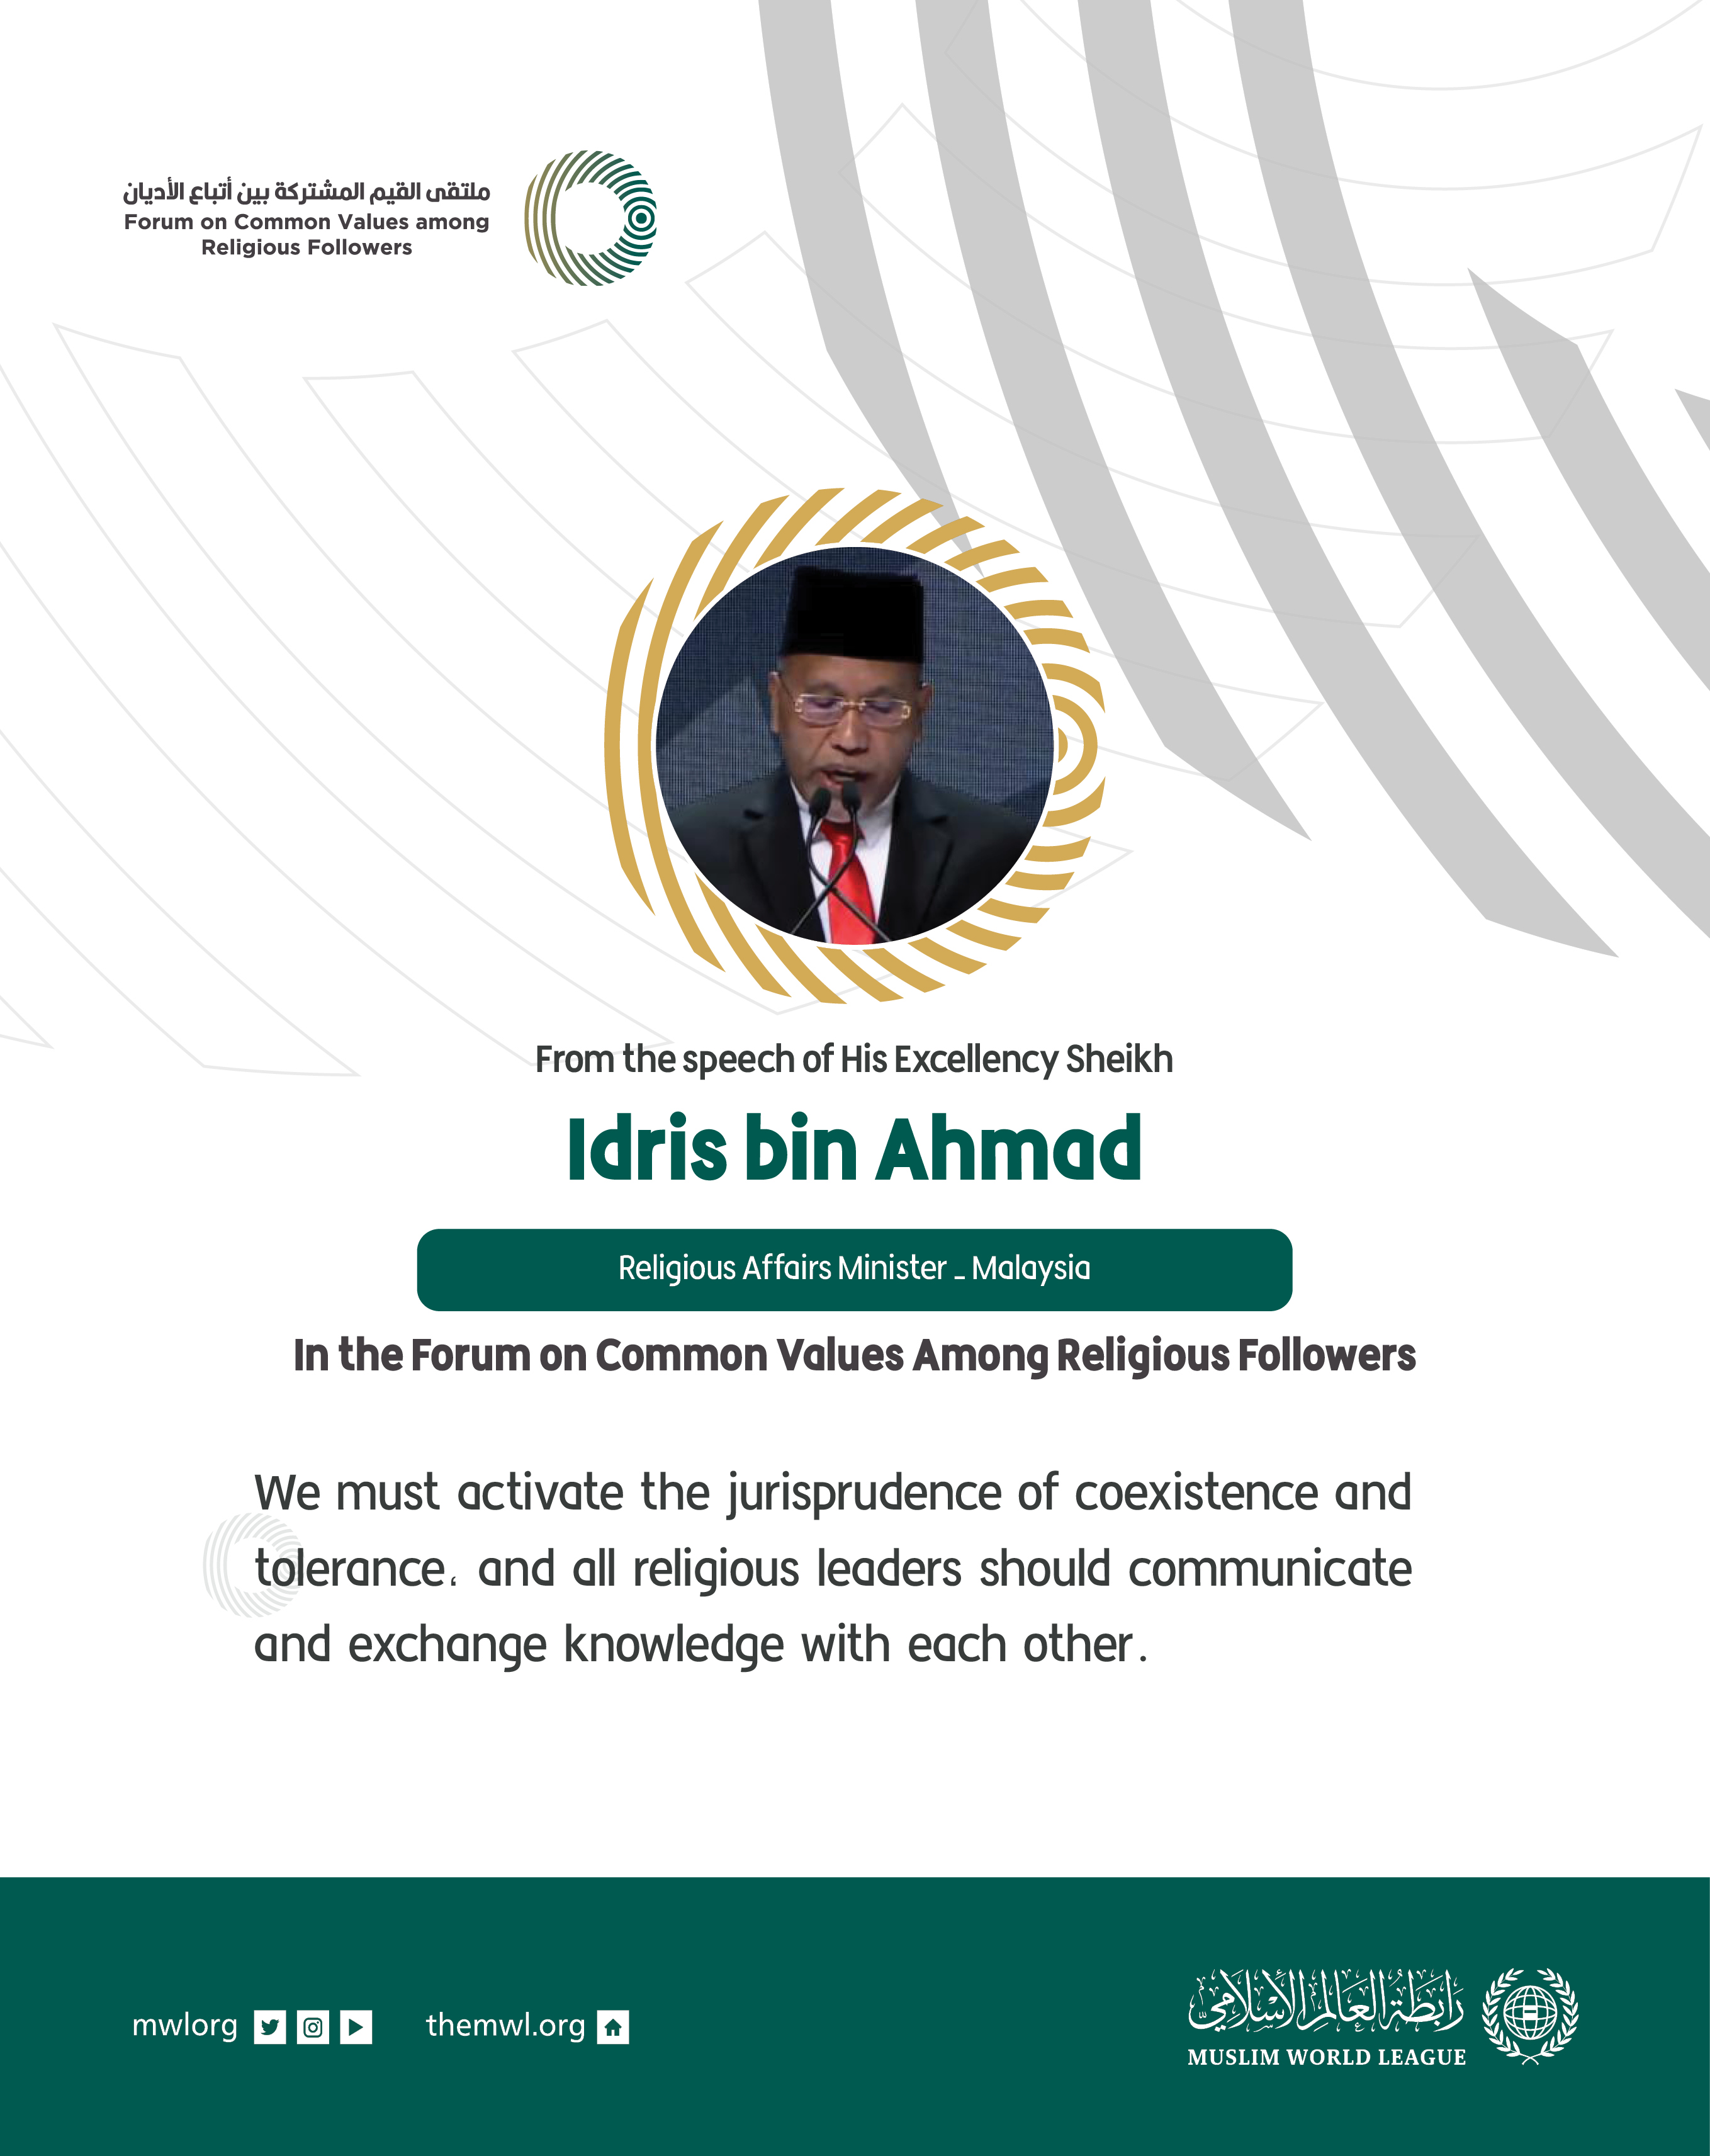  From the speech of His Excellency Religious Affairs Minister in Malaysia,  Sheikh Idris bin Ahmad, in the Forum on Common Values Among Religious Followers in Riyadh: 